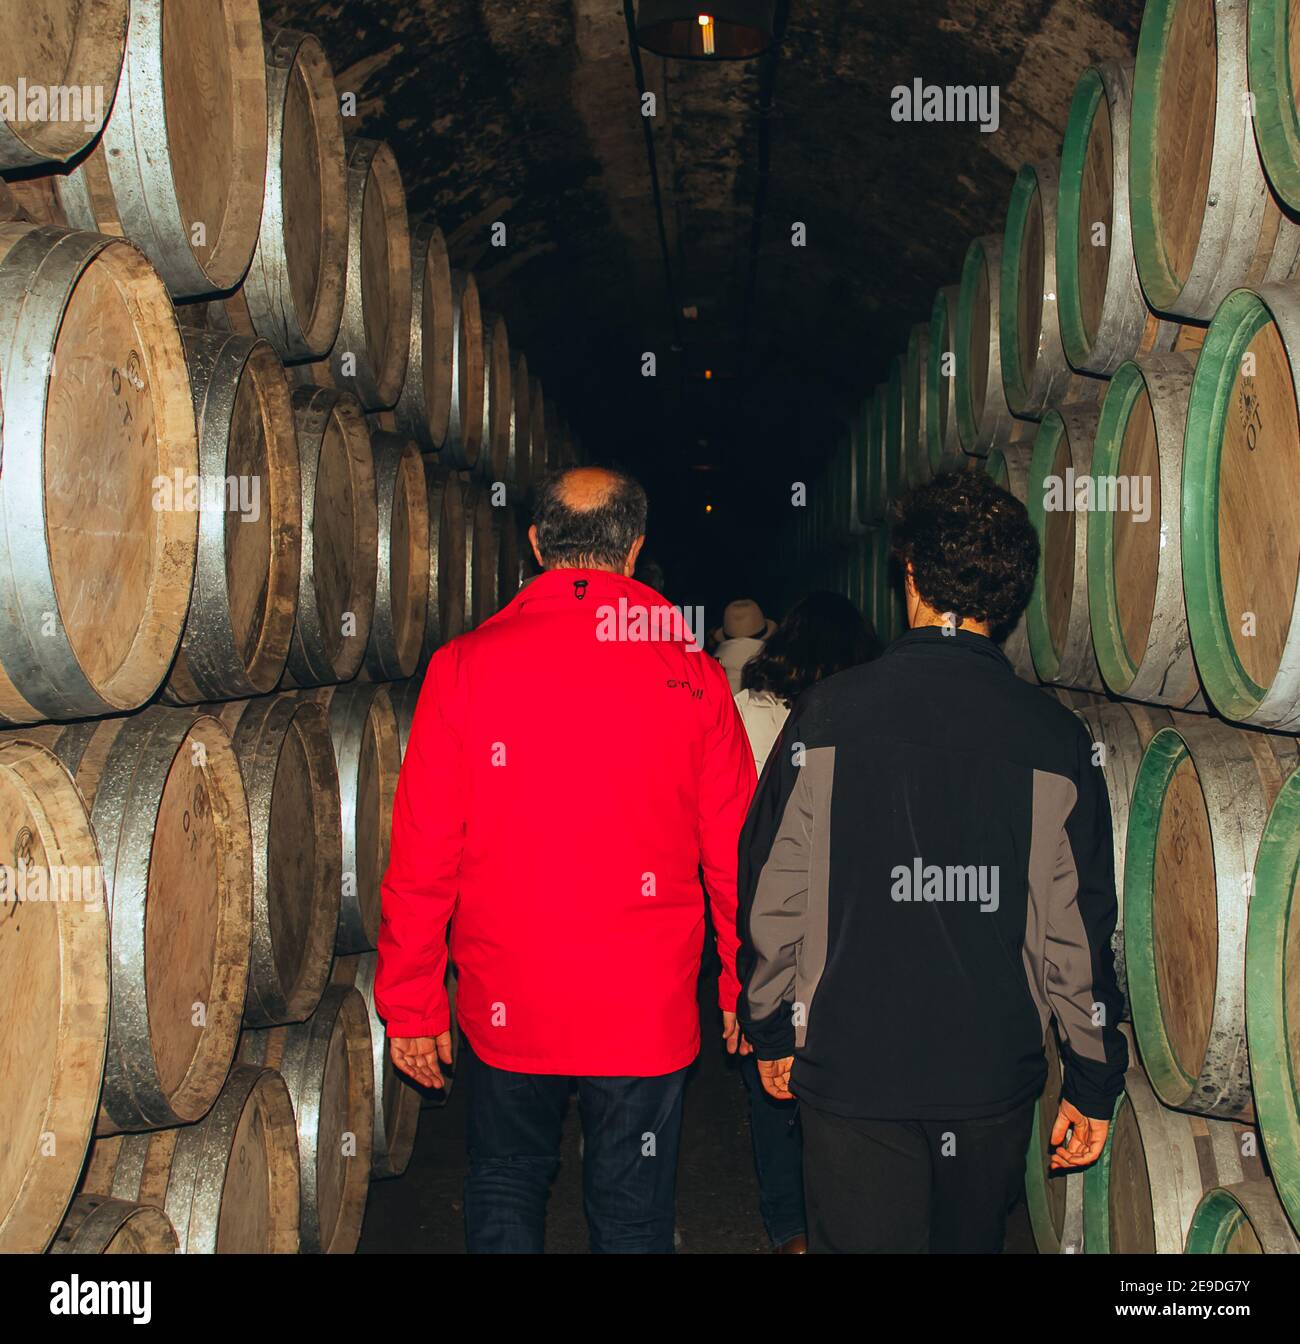 EL CIEGO, ÁLAVA, SPAIN - Jan 31, 2021: The picture shows a guided tour among wine barrels at the Marques de Riscal Winery. Stock Photo